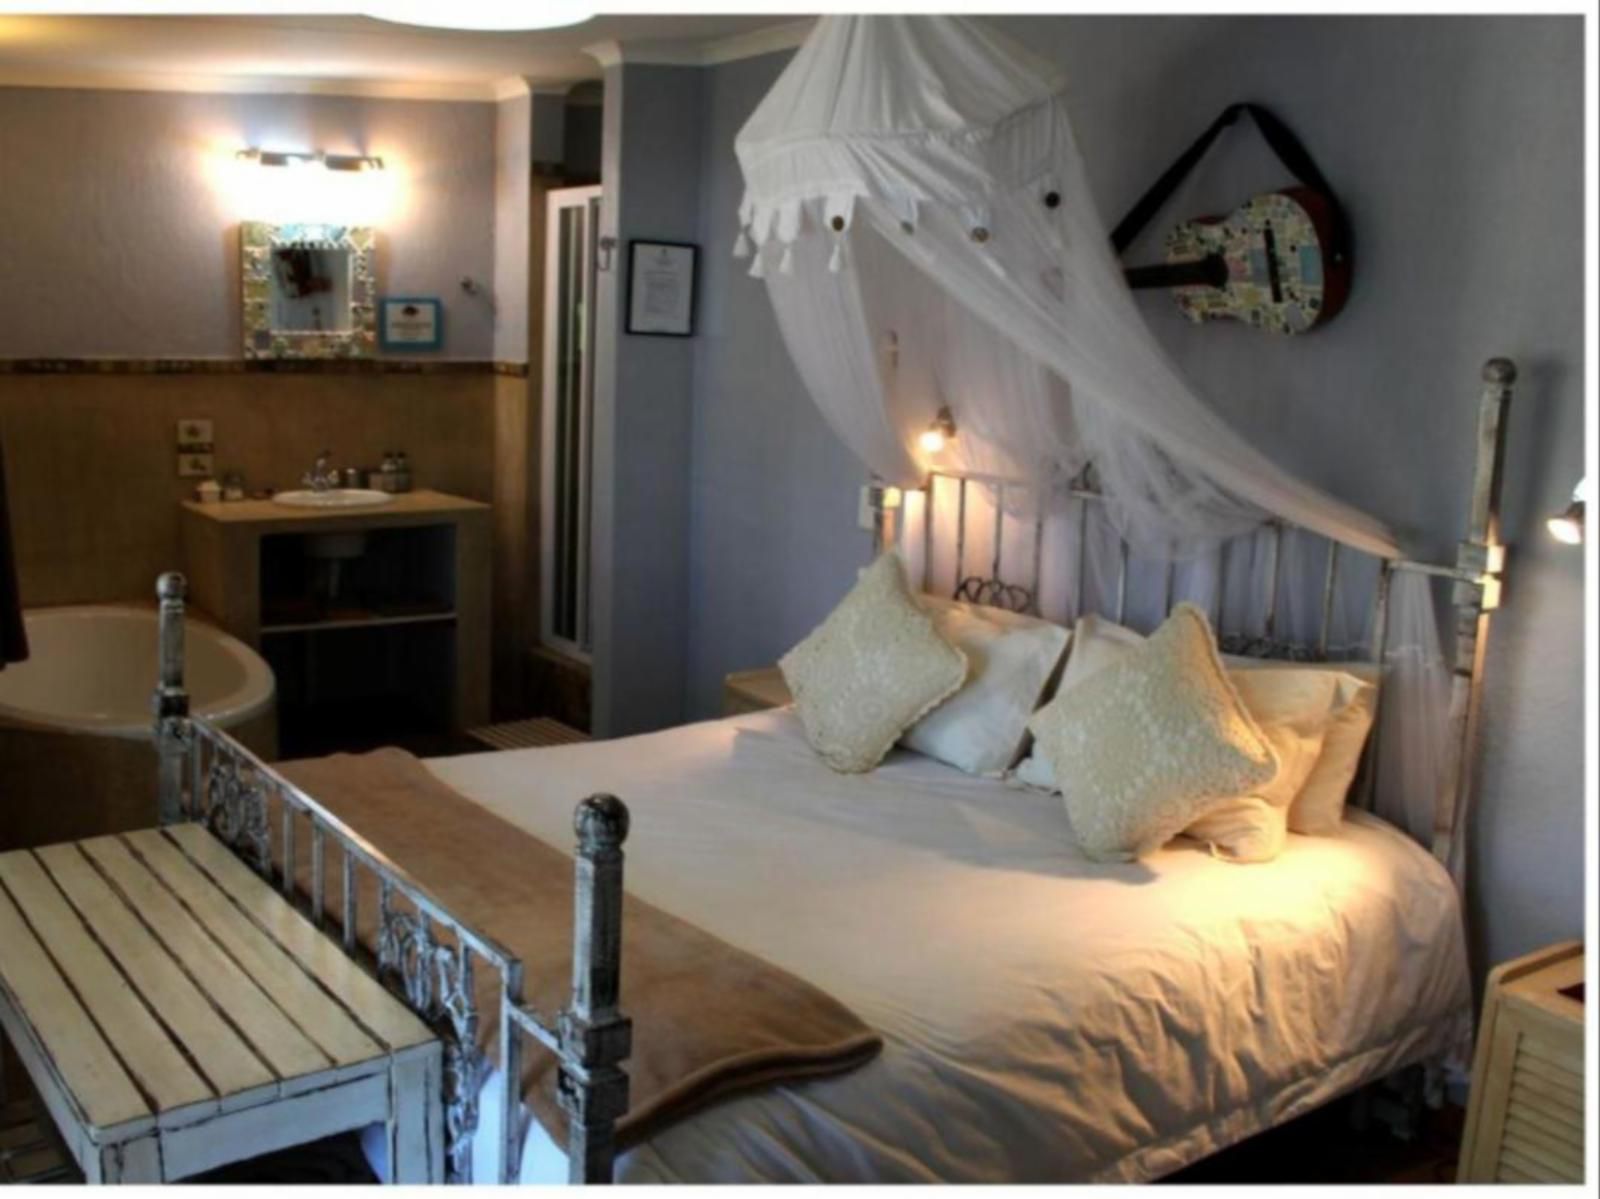 Blyde Mountain Country House Hoedspruit Limpopo Province South Africa Bedroom